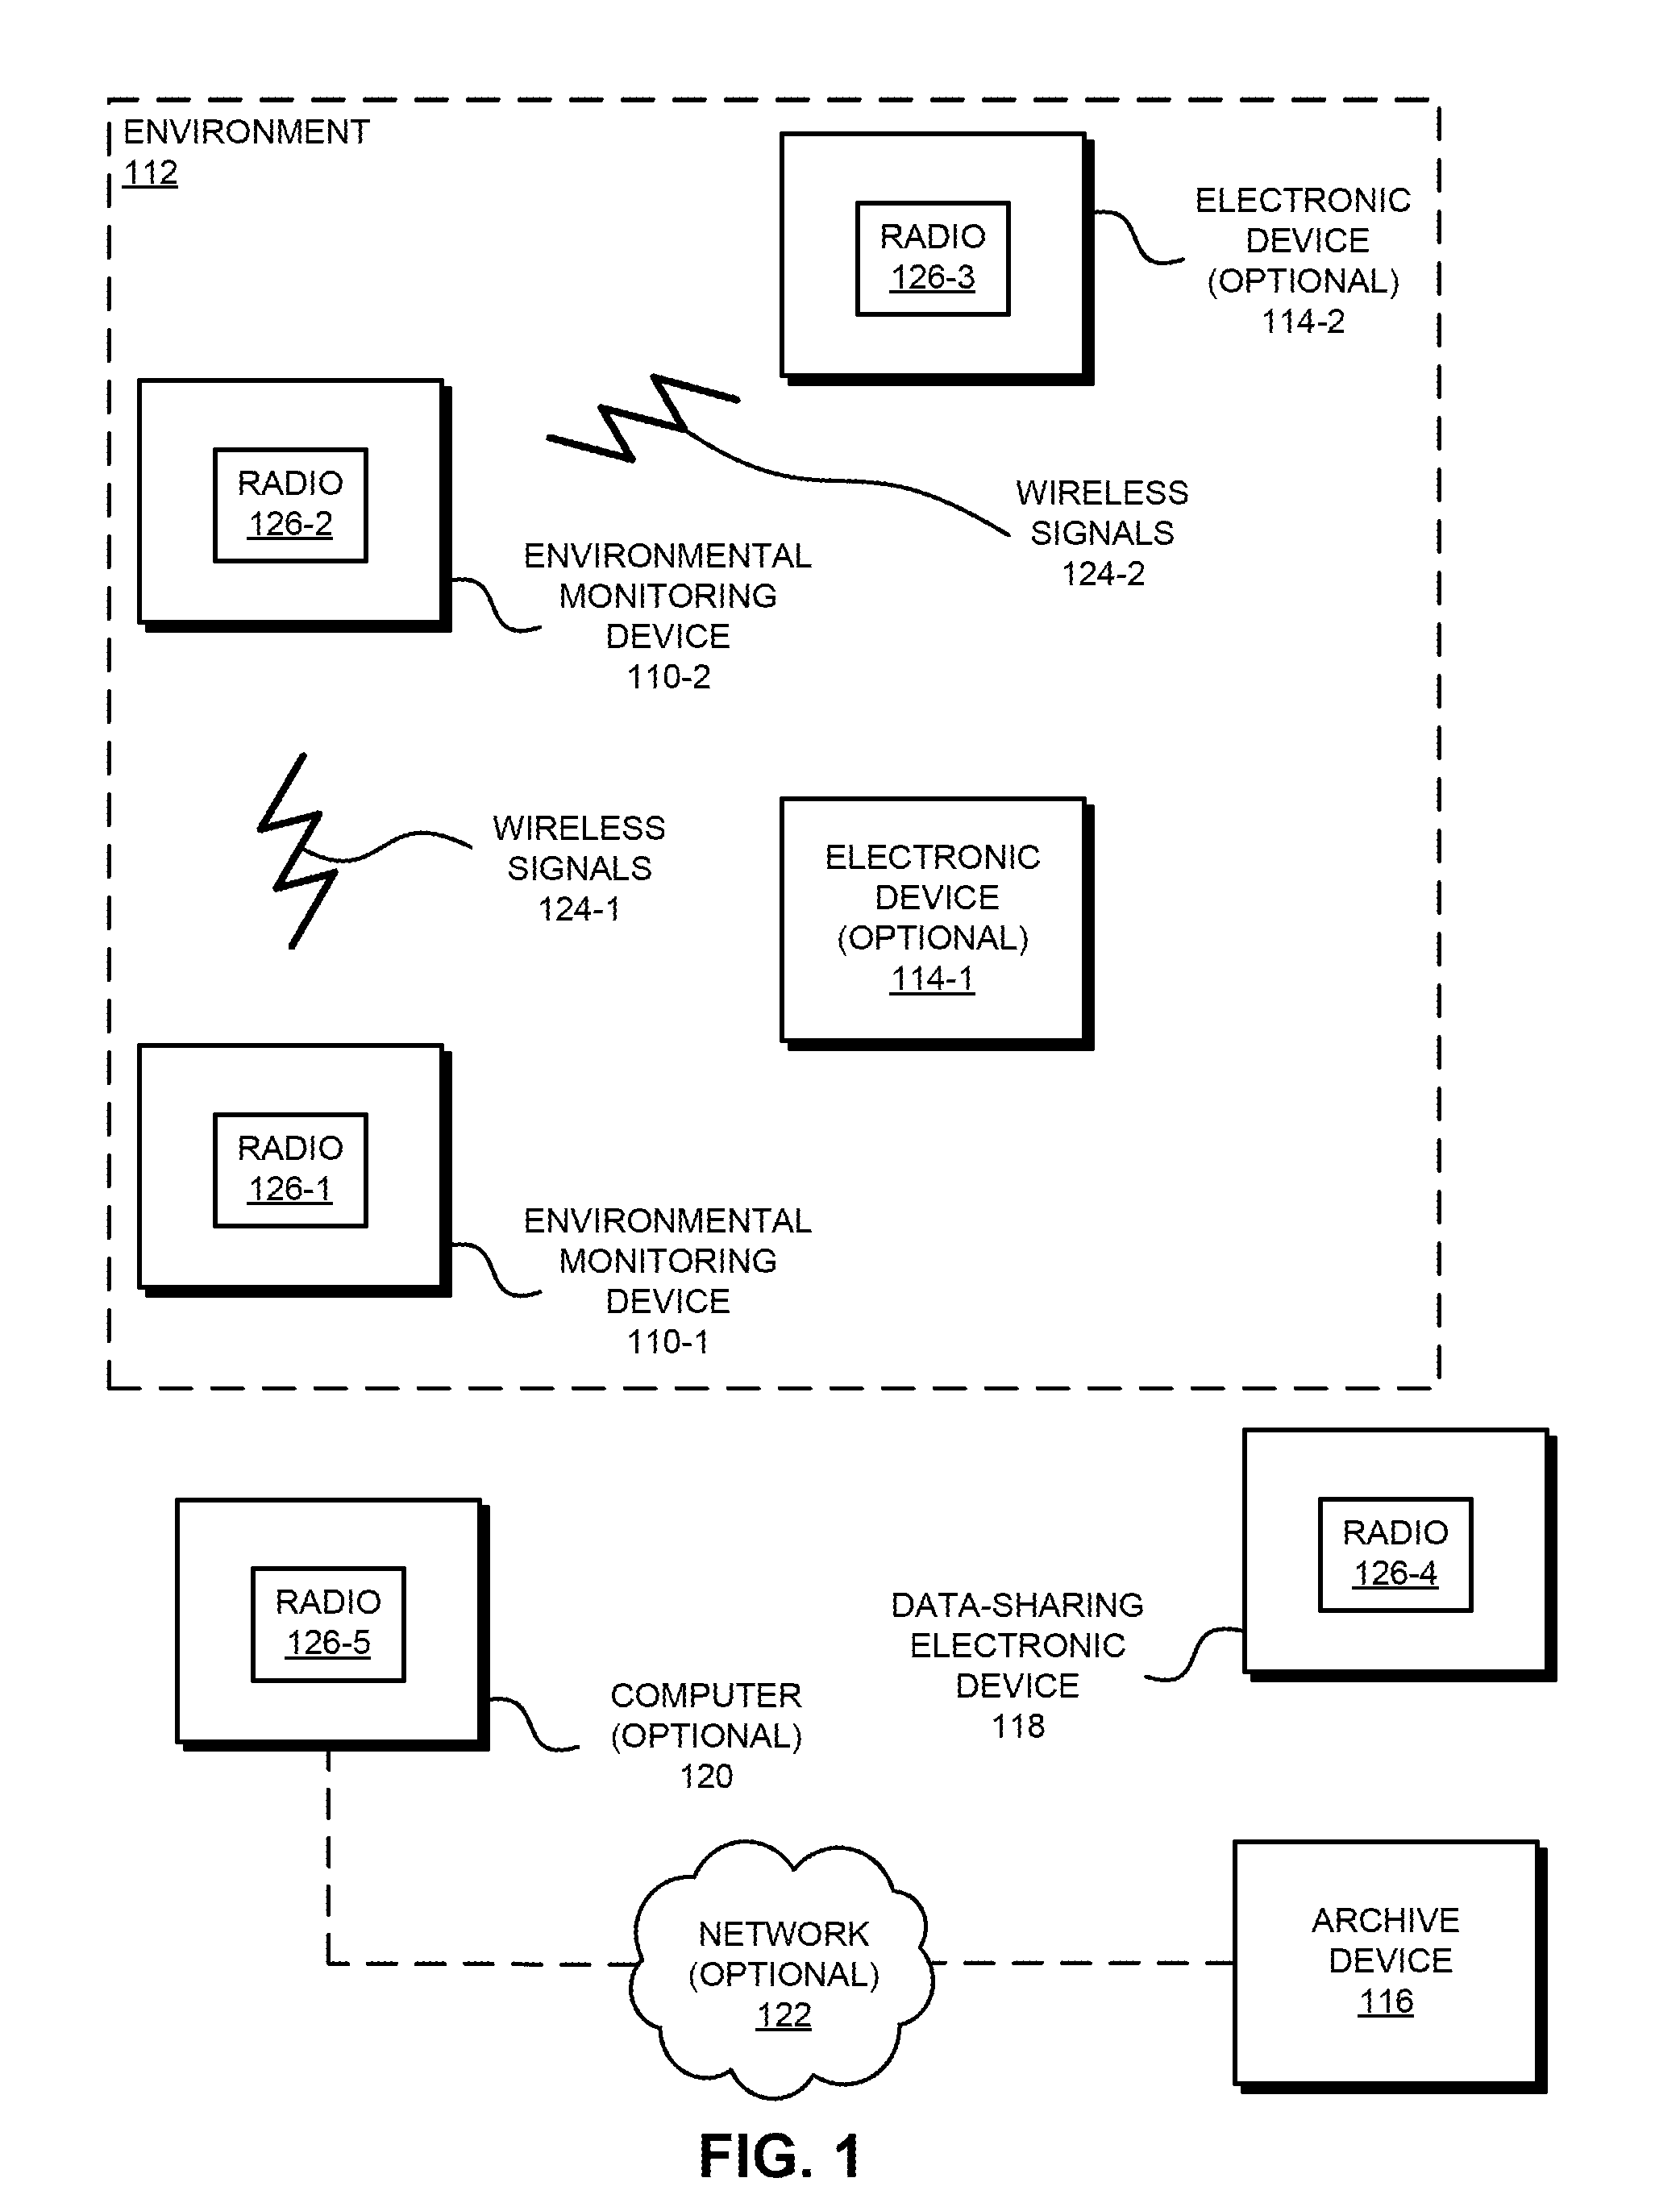 Electronic device with environmental monitoring